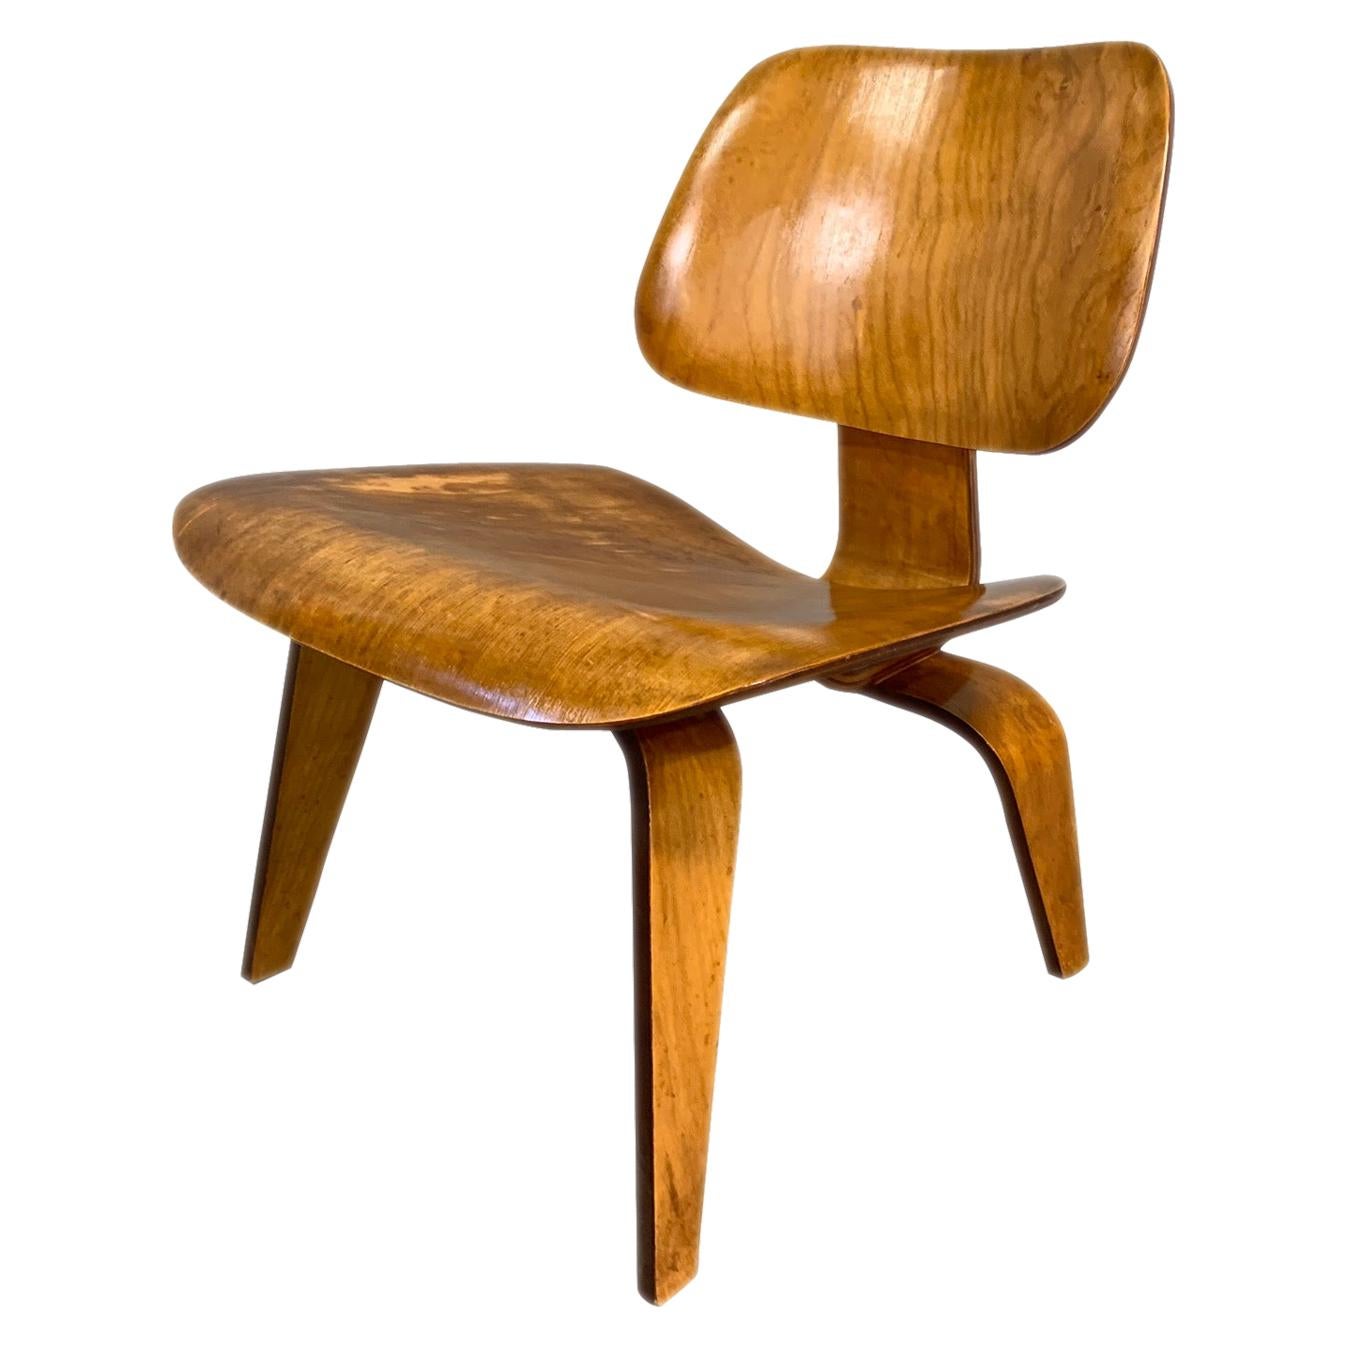 Charles Eames LCW Midcentury Lounge Chair in Maple for Herman Miller